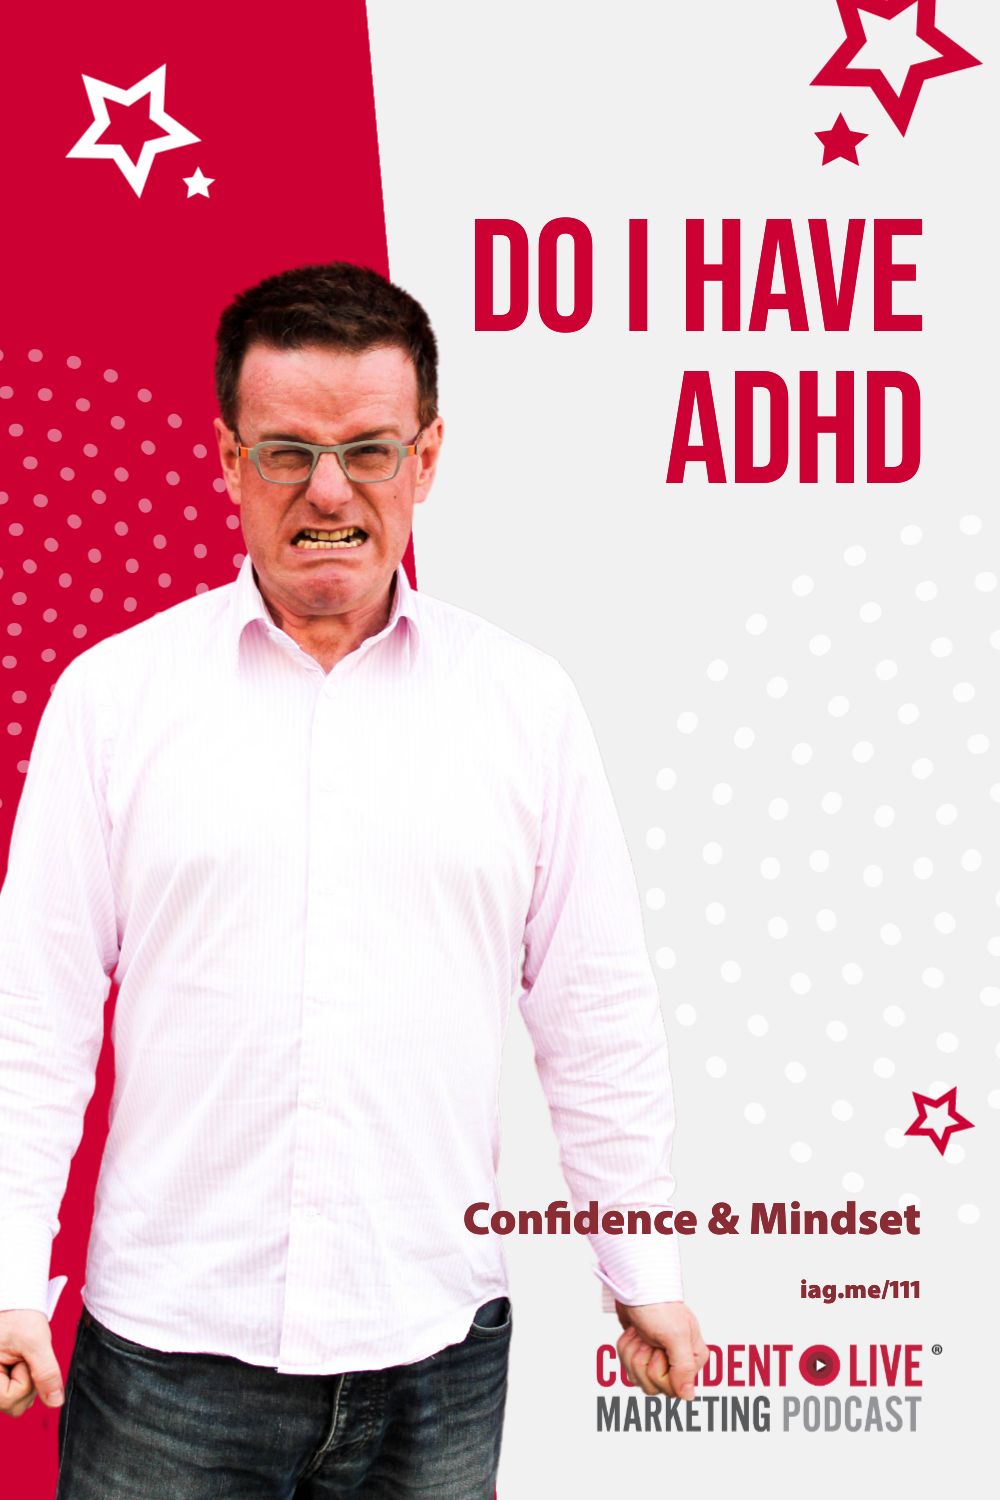 Do I have ADHD?